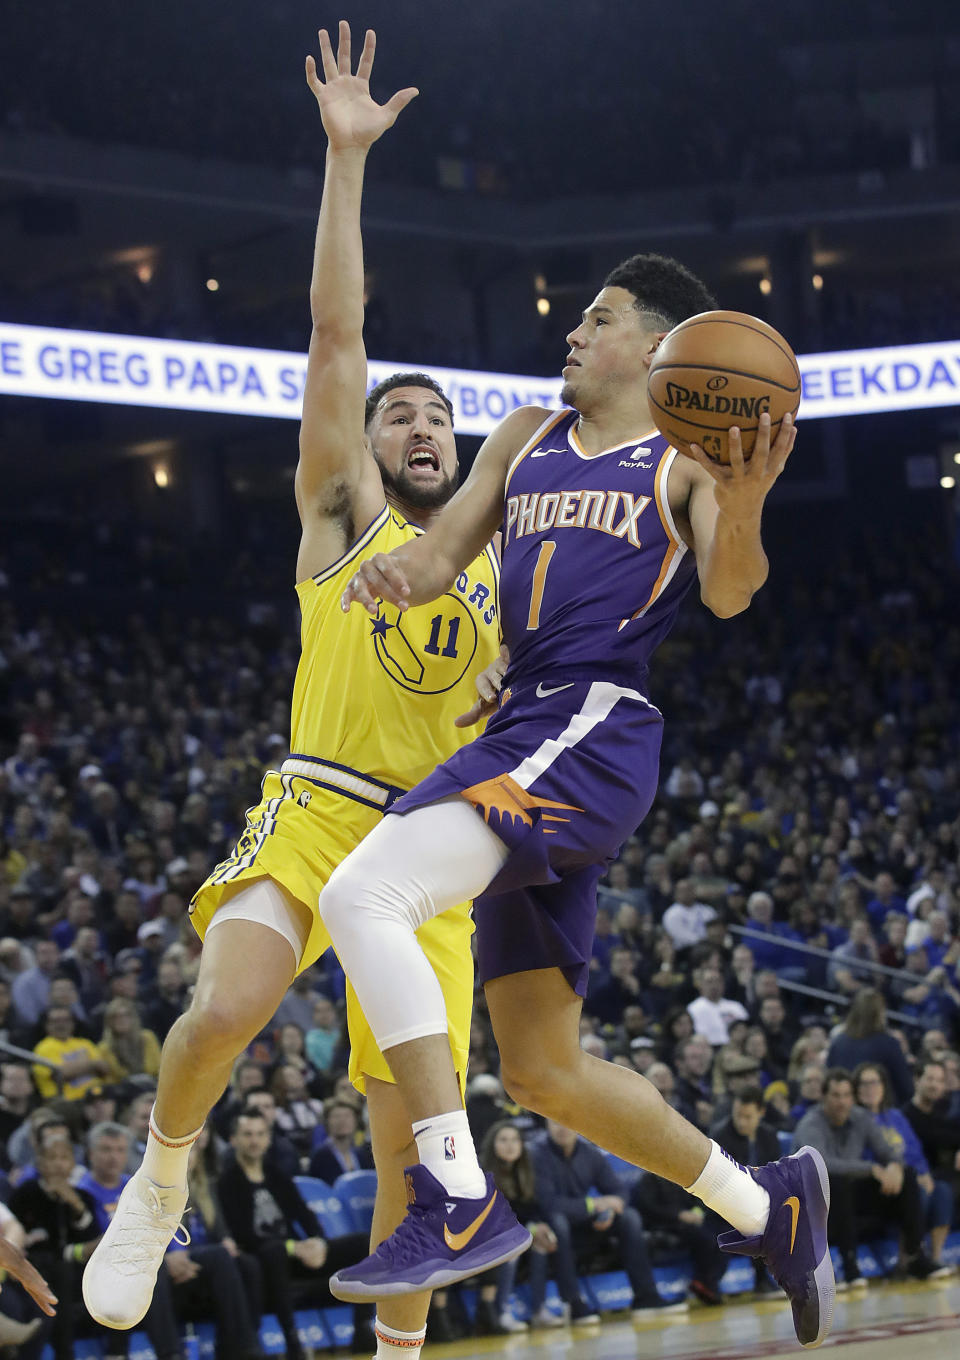 Phoenix Suns guard Devin Booker (1) shoot against Golden State Warriors guard Klay Thompson (11) during the first half of an NBA basketball game in Oakland, Calif., Sunday, March 10, 2019. (AP Photo/Jeff Chiu)